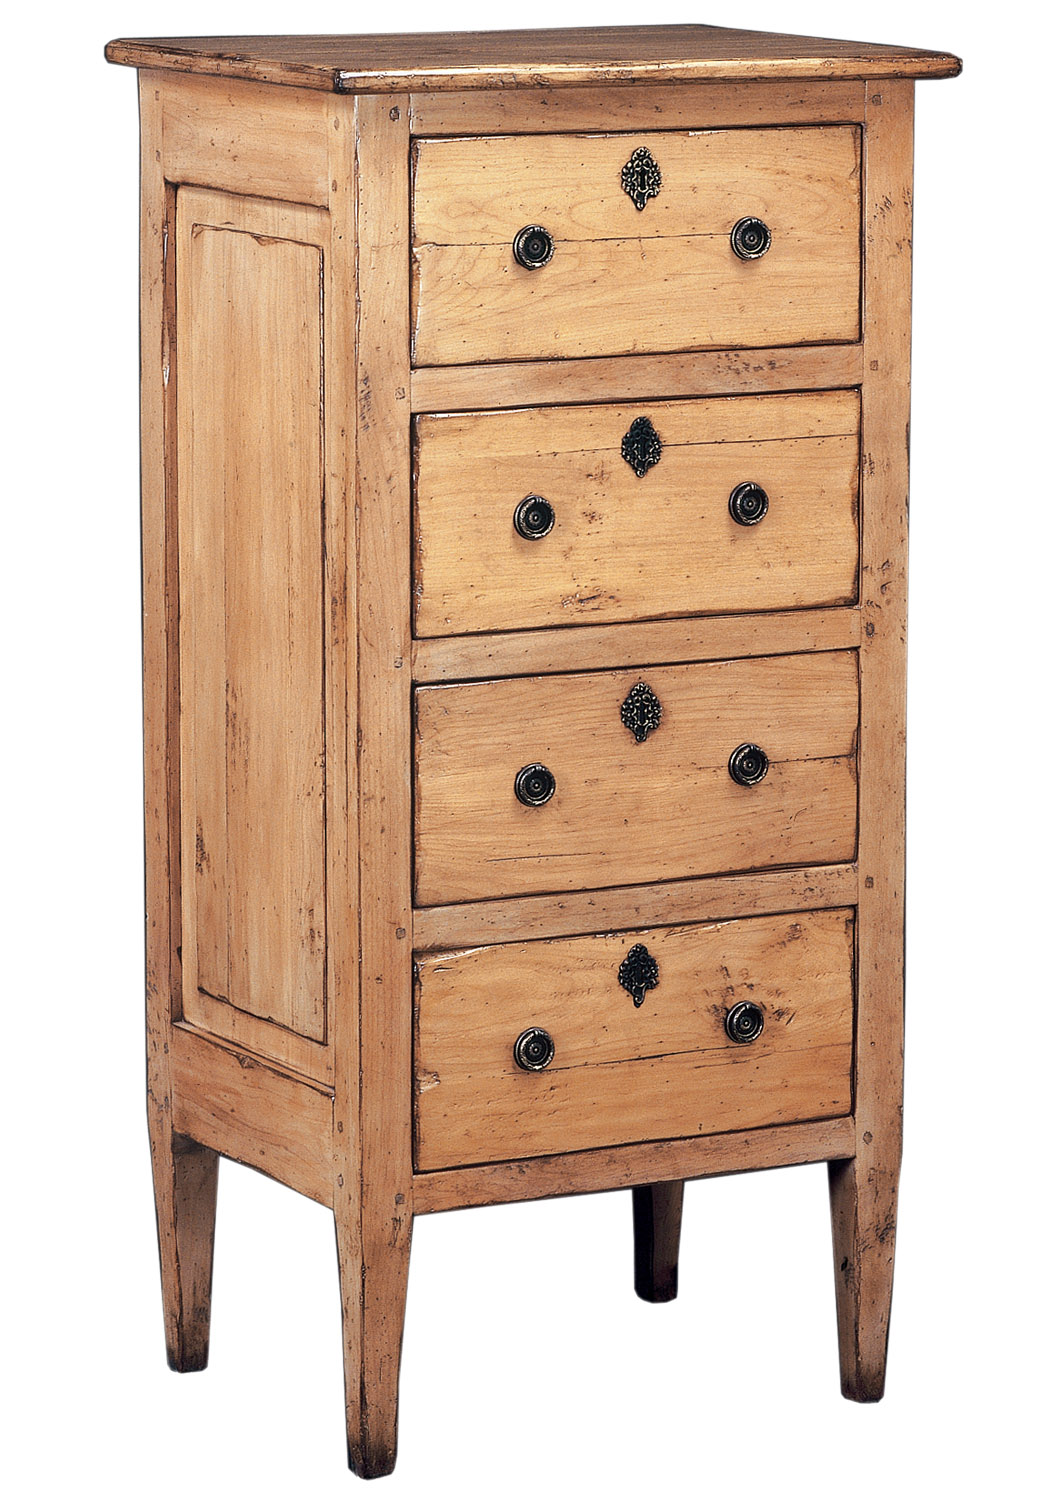 Concord traditional upright narrow chest of drawers farmhouse dresser by Woodland furniture in Idaho Falls